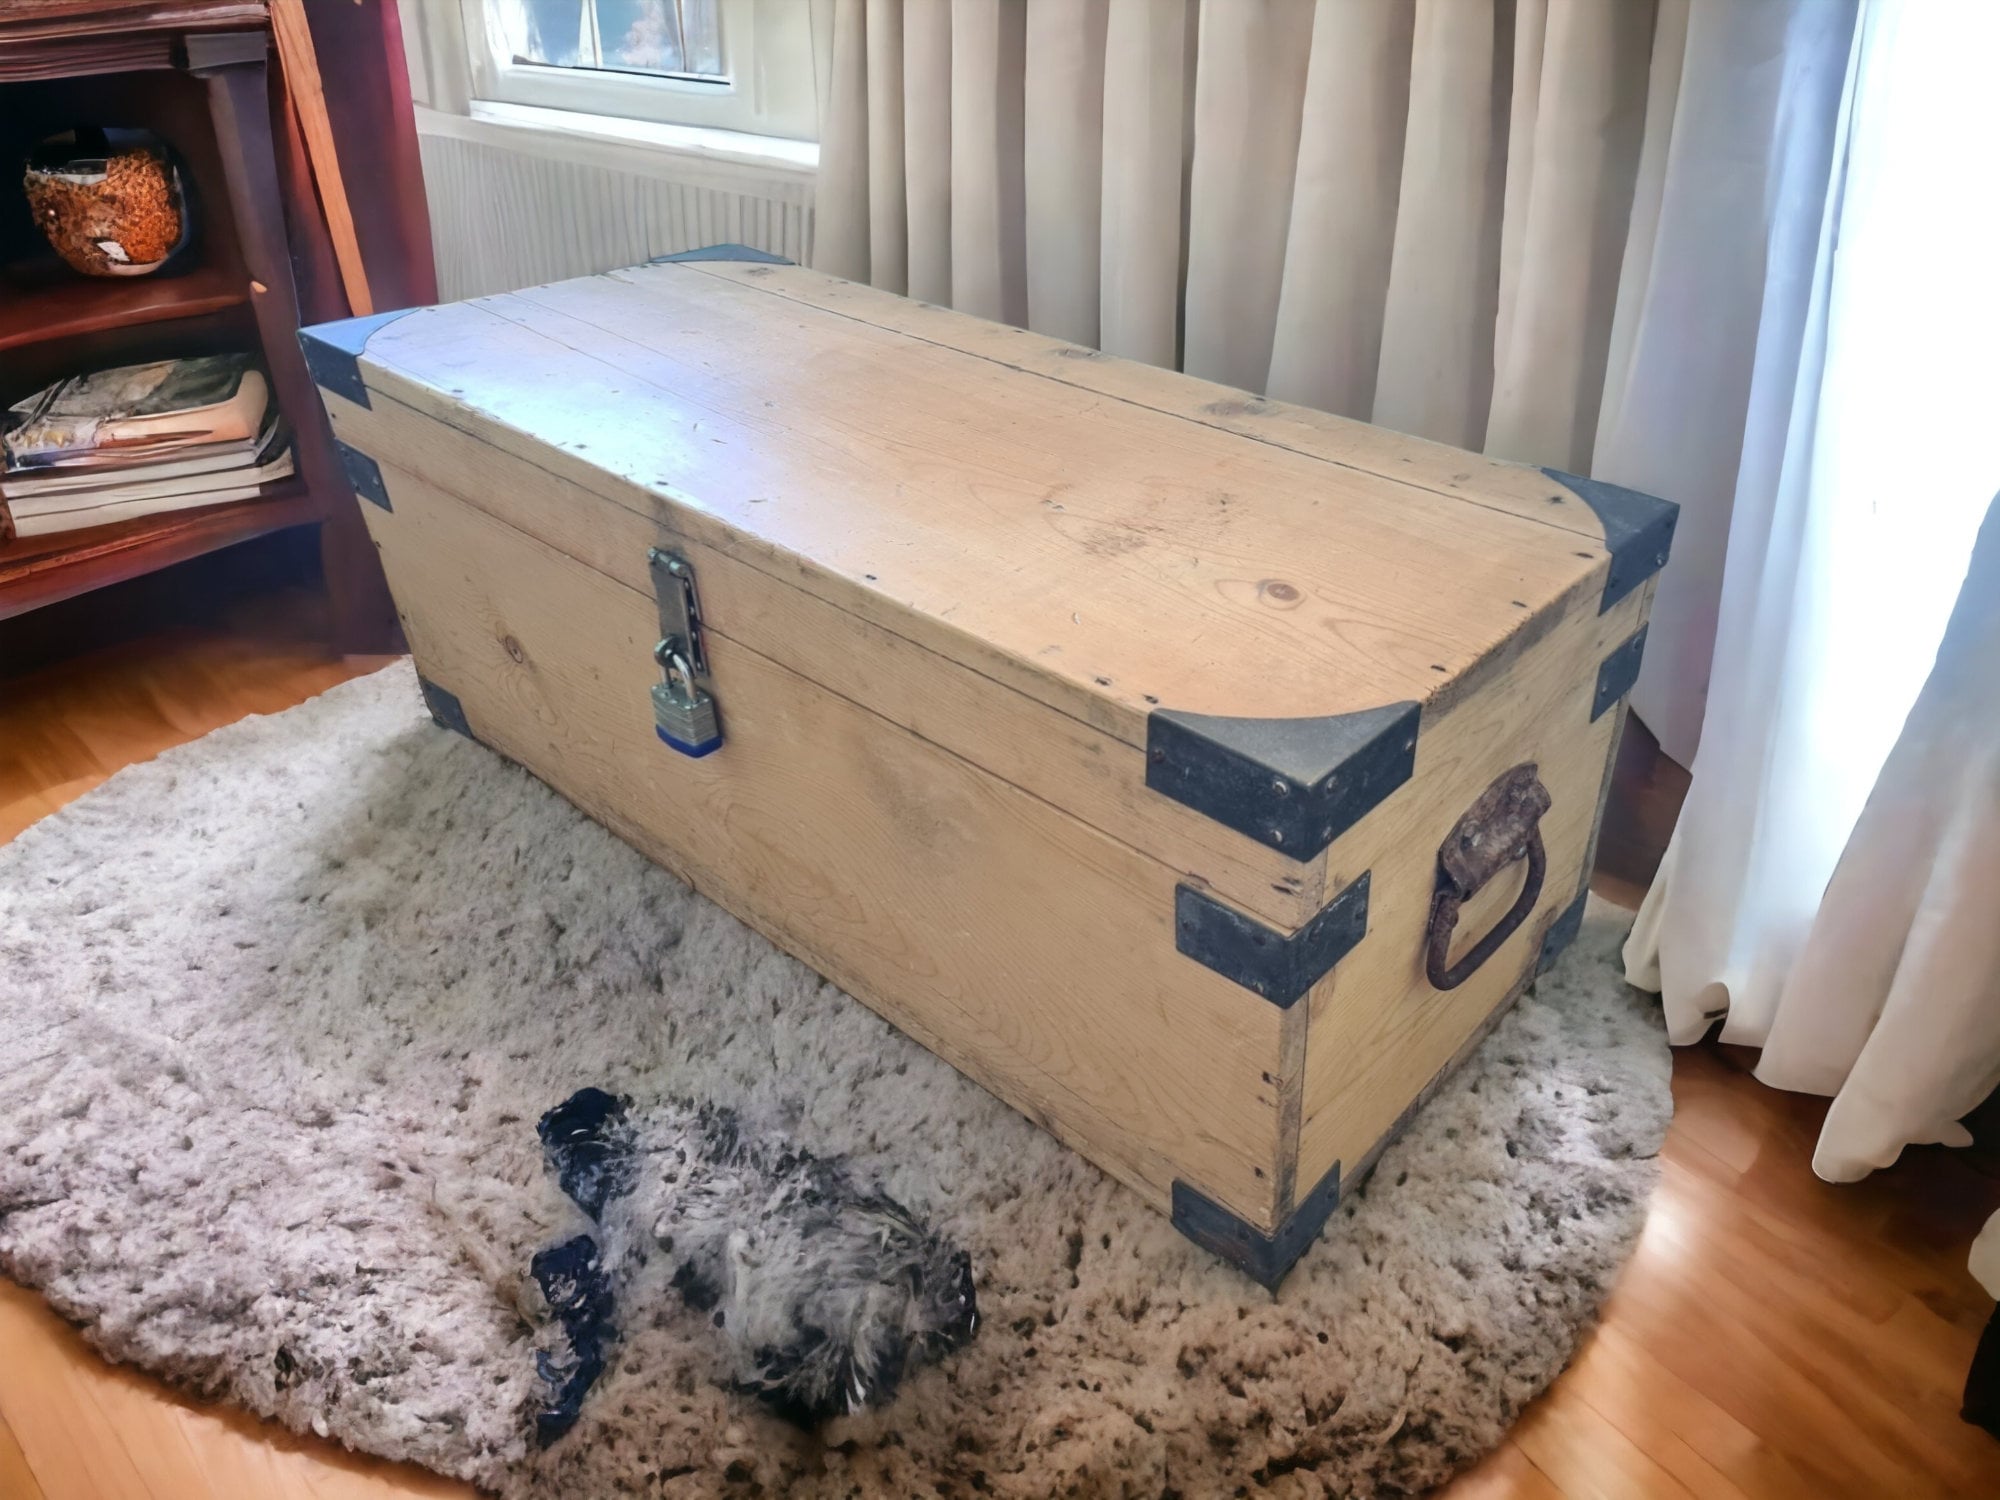 Trunk Vintage Military Foot Locker Storage Rustic Steamer Coffee Table Hope  Chest Blanket Bench Wood Bohemian Boho Chic Cottage Primitive